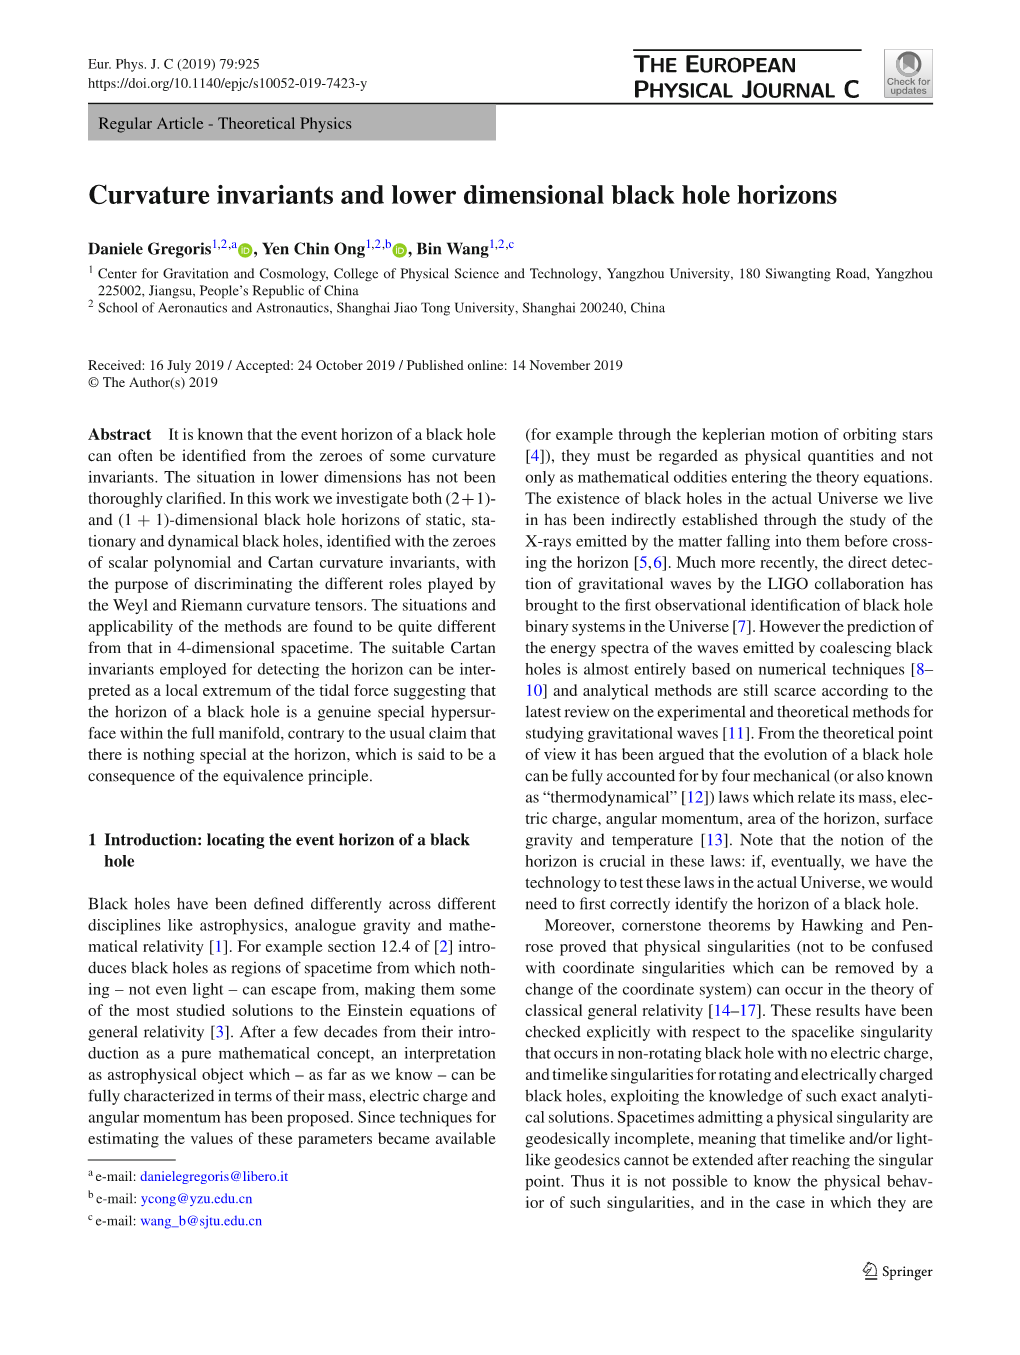 Curvature Invariants and Lower Dimensional Black Hole Horizons